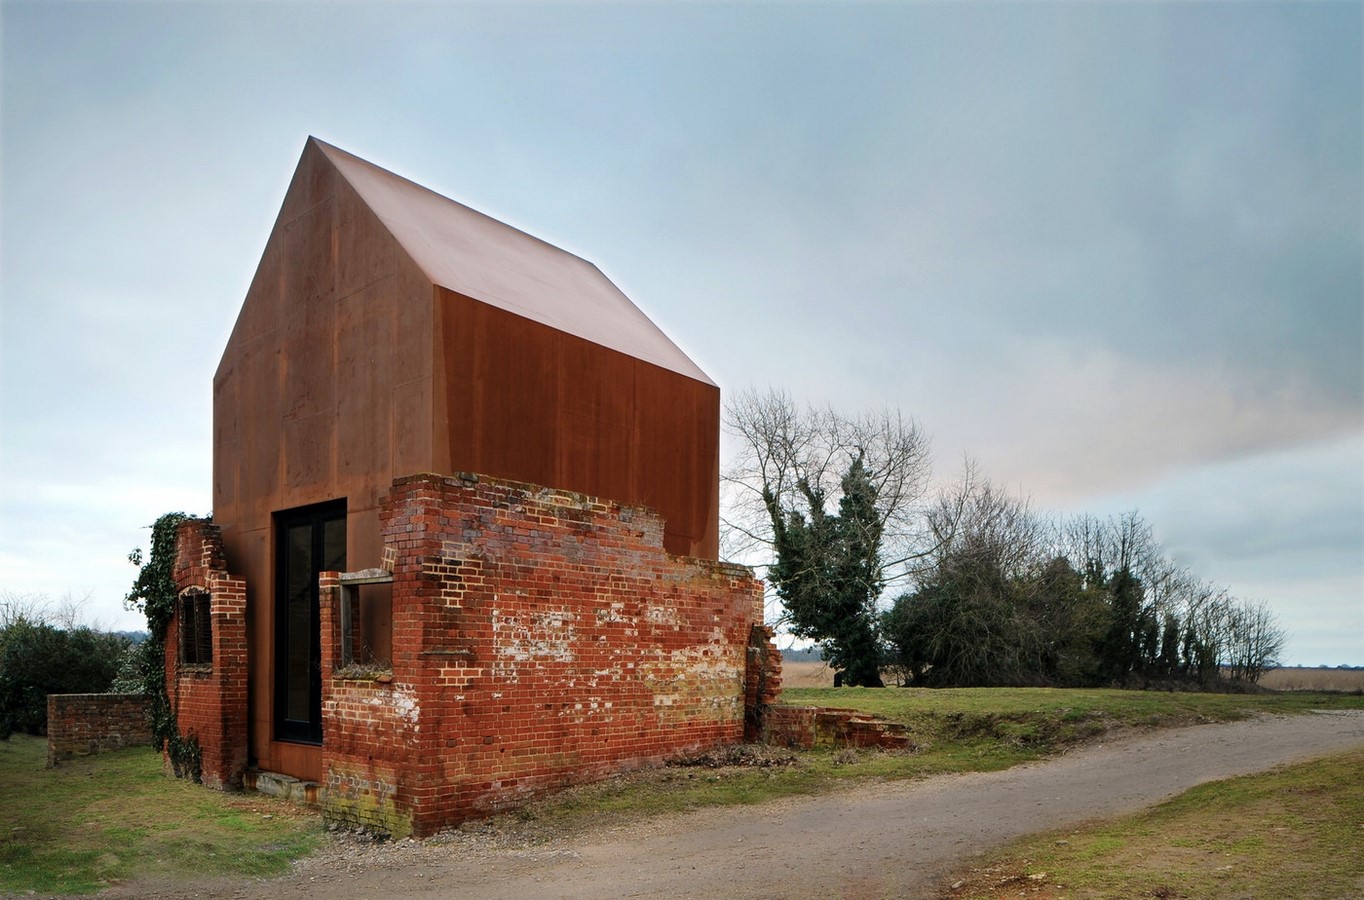 10 Examples To Conserve Older Buildings -The Dovecote Studio - Sheet1